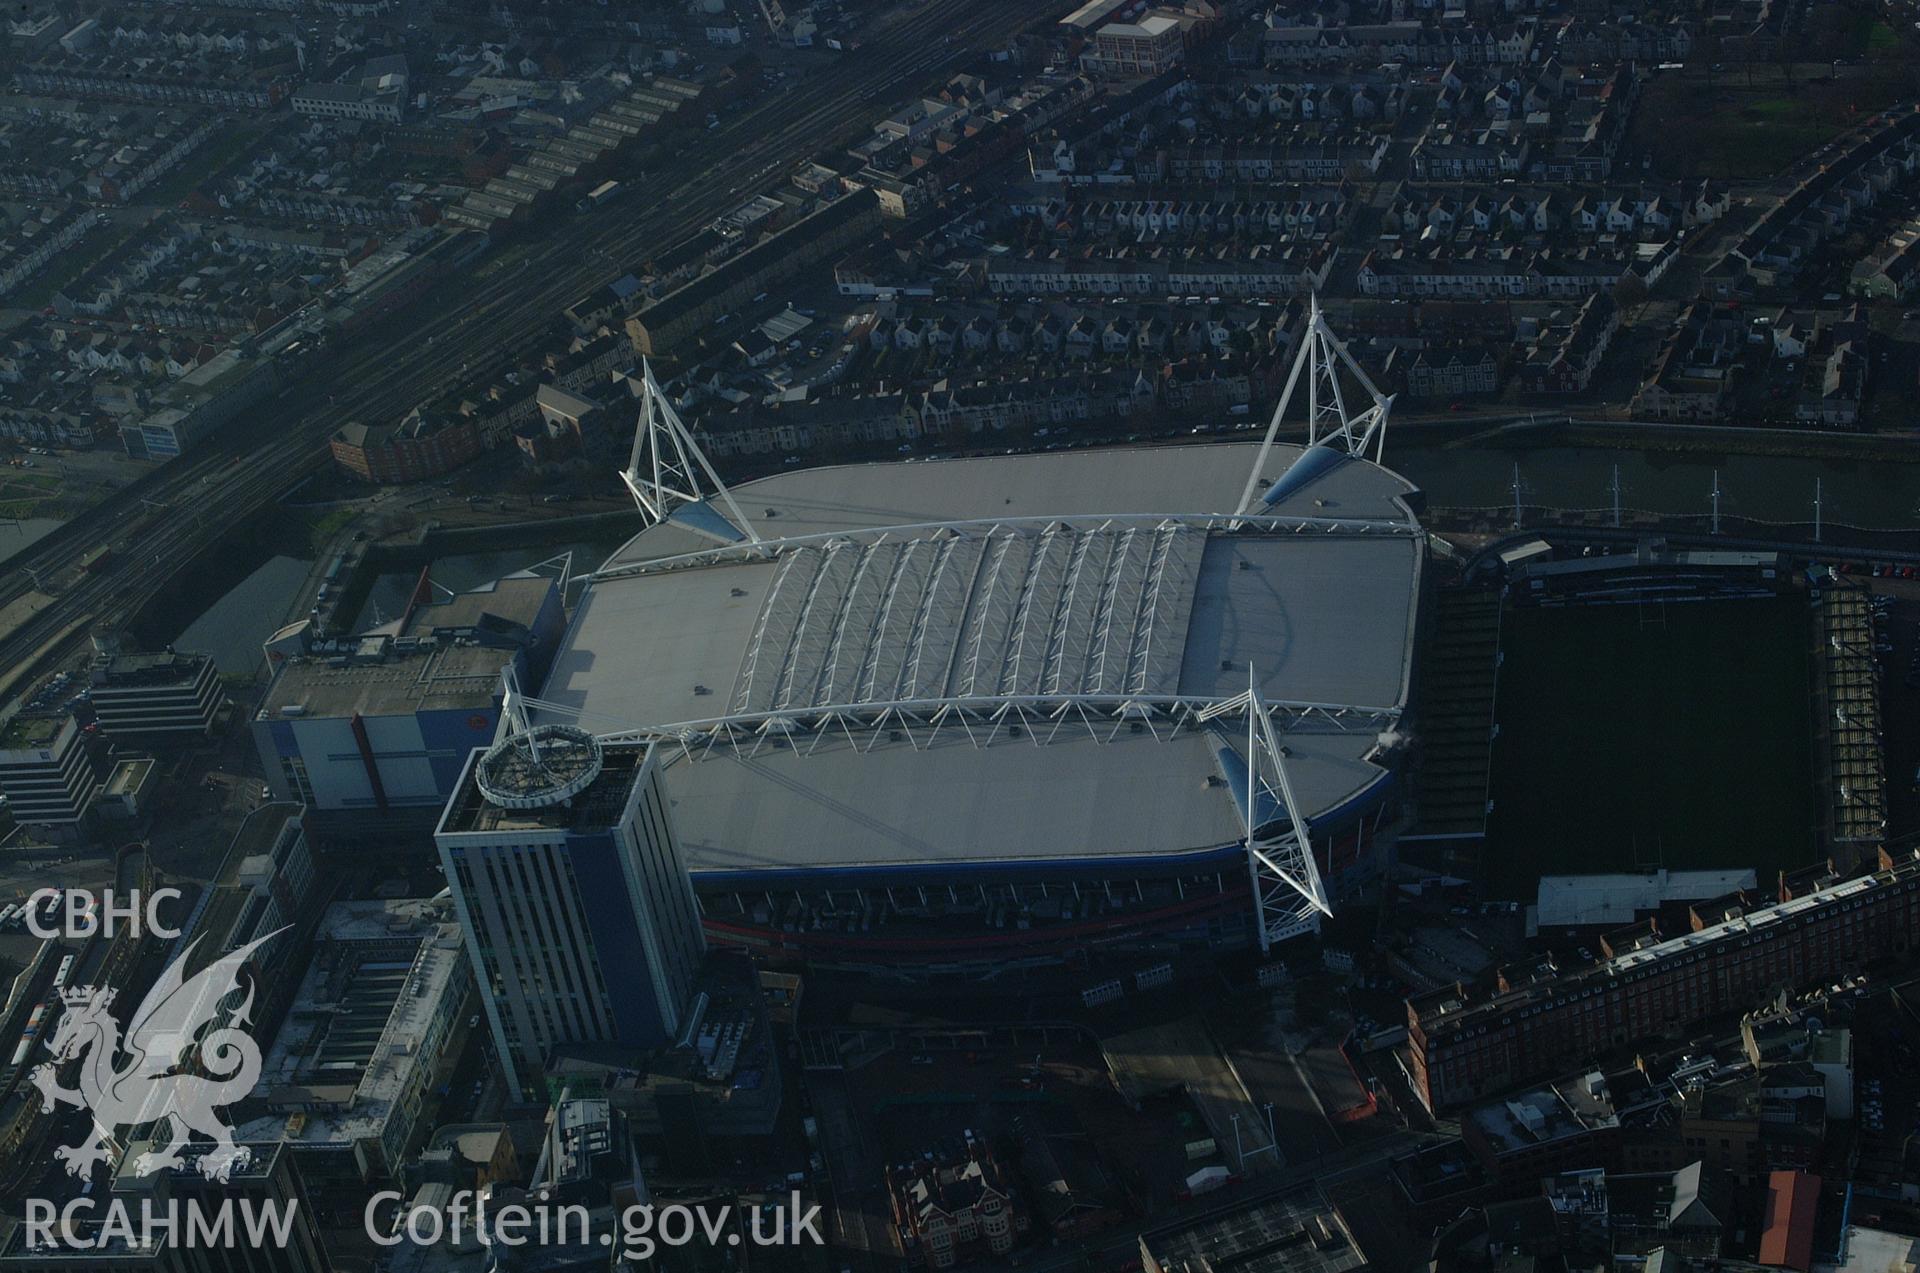 RCAHMW colour oblique aerial photograph of Cardiff Millennium Stadium taken on 13/01/2005 by Toby Driver